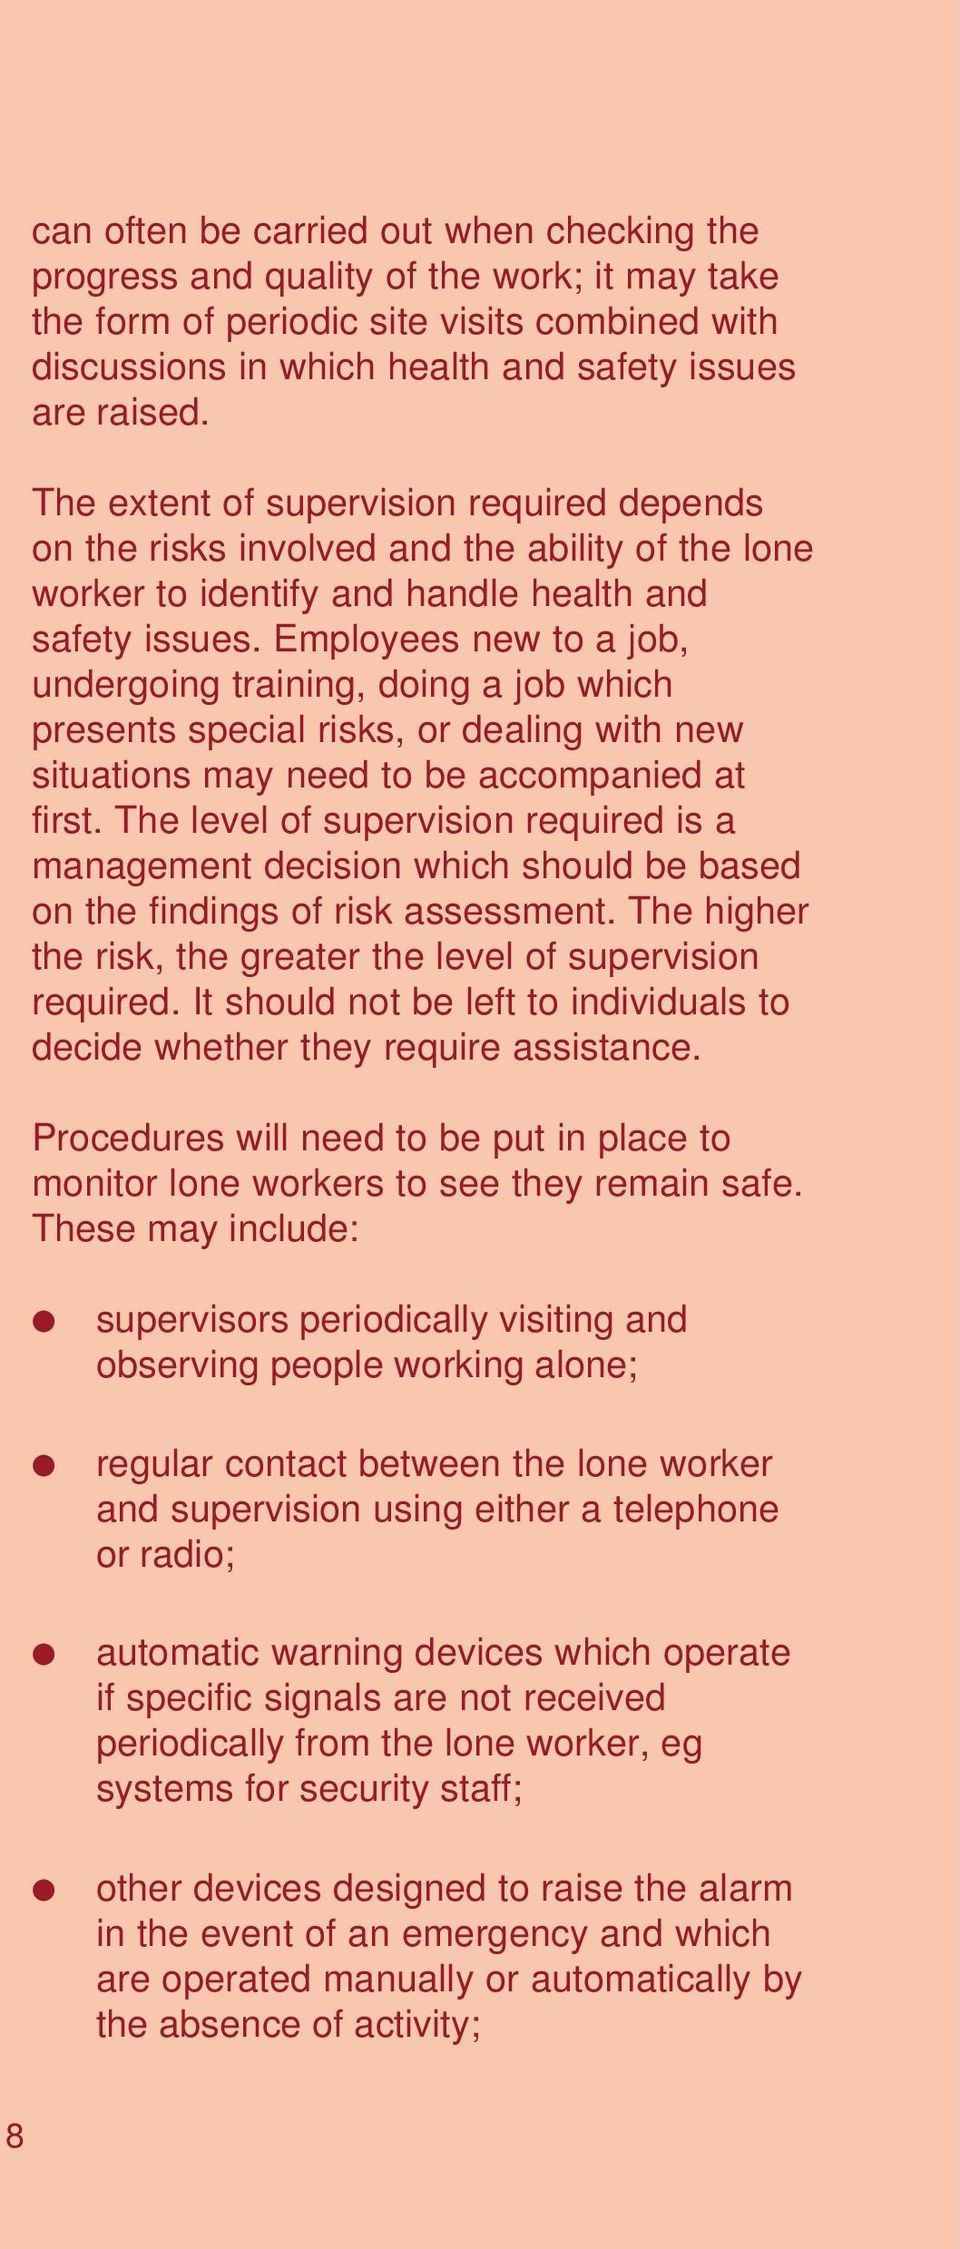 Employees new to a job, undergoing training, doing a job which presents special risks, or dealing with new situations may need to be accompanied at first.